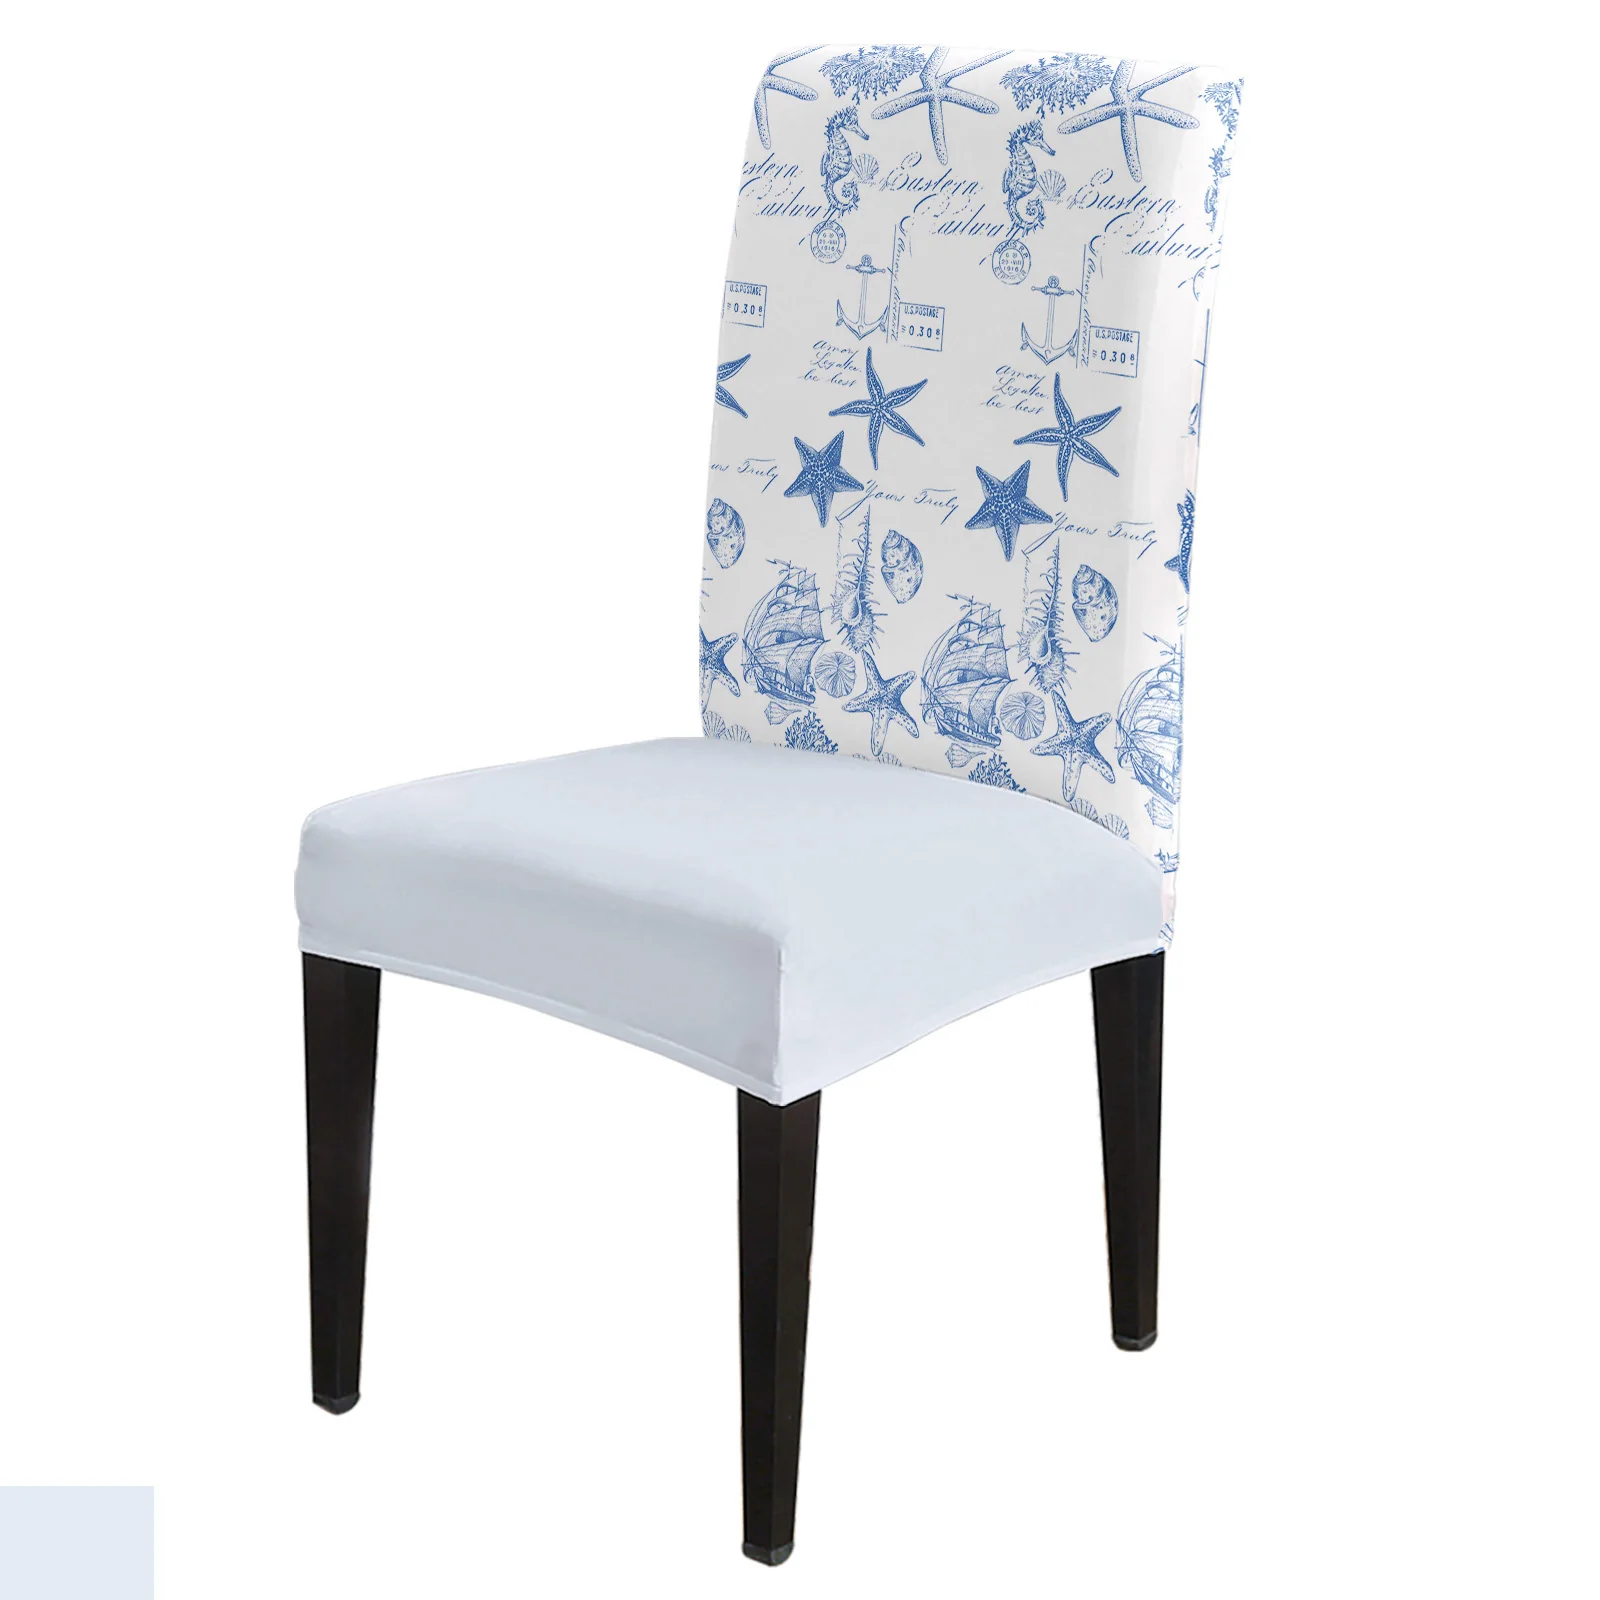 

Blue Ocean Starfish Shell Coral Vessel Texture Stretch Chair Cover Kitchen Dinning Chair Seat Cover Christmas Chair Covers